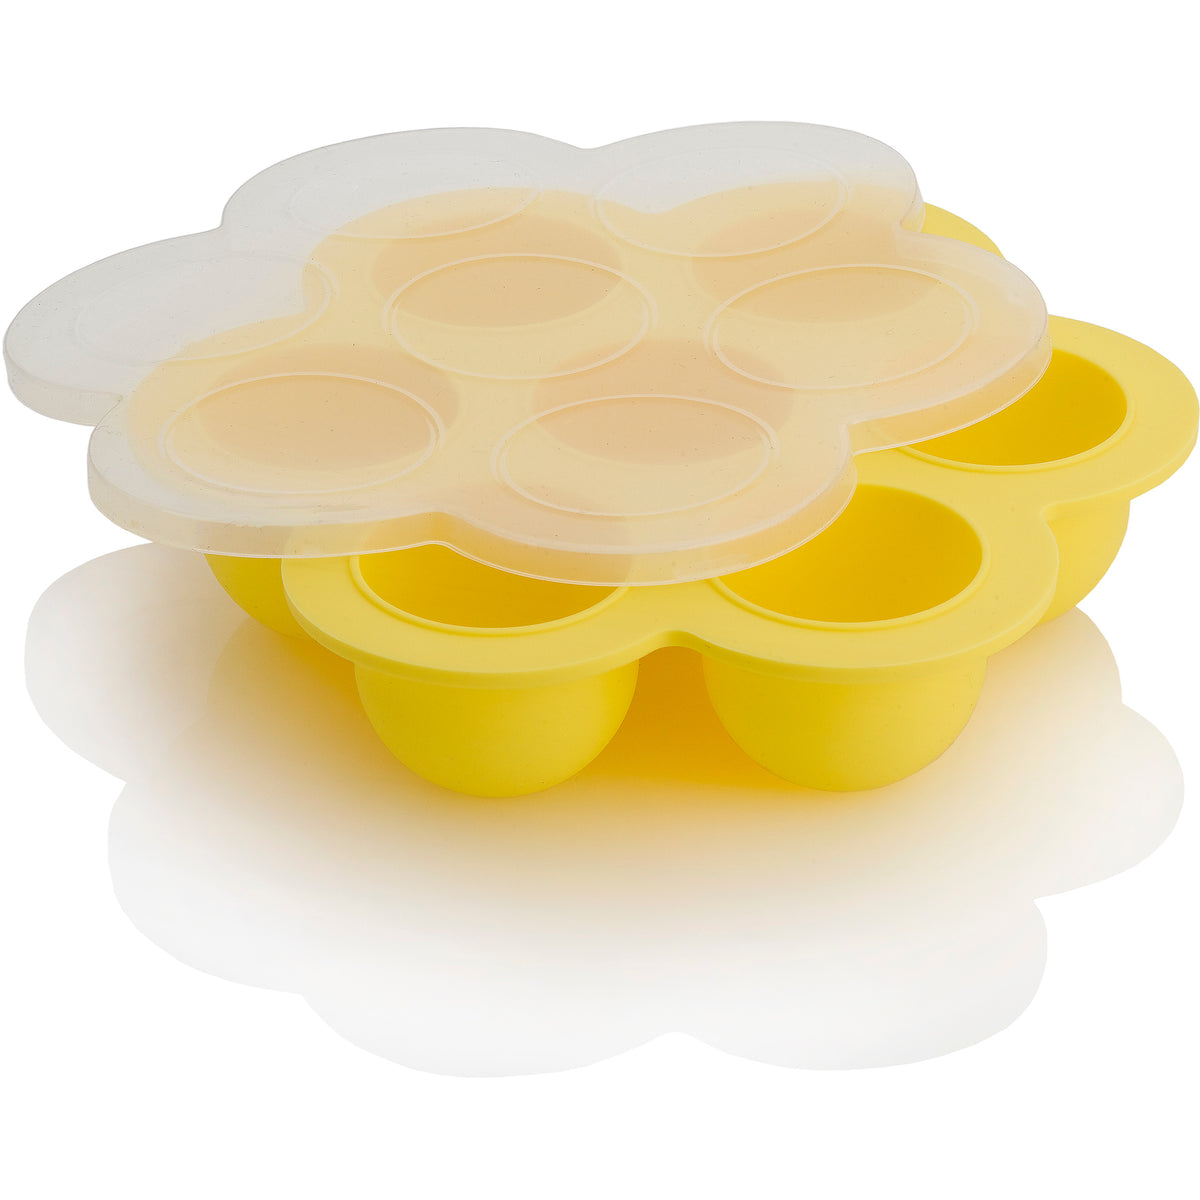 Generic PRAMOO Silicone Egg Bites Mold and Silicone Egg Steamer